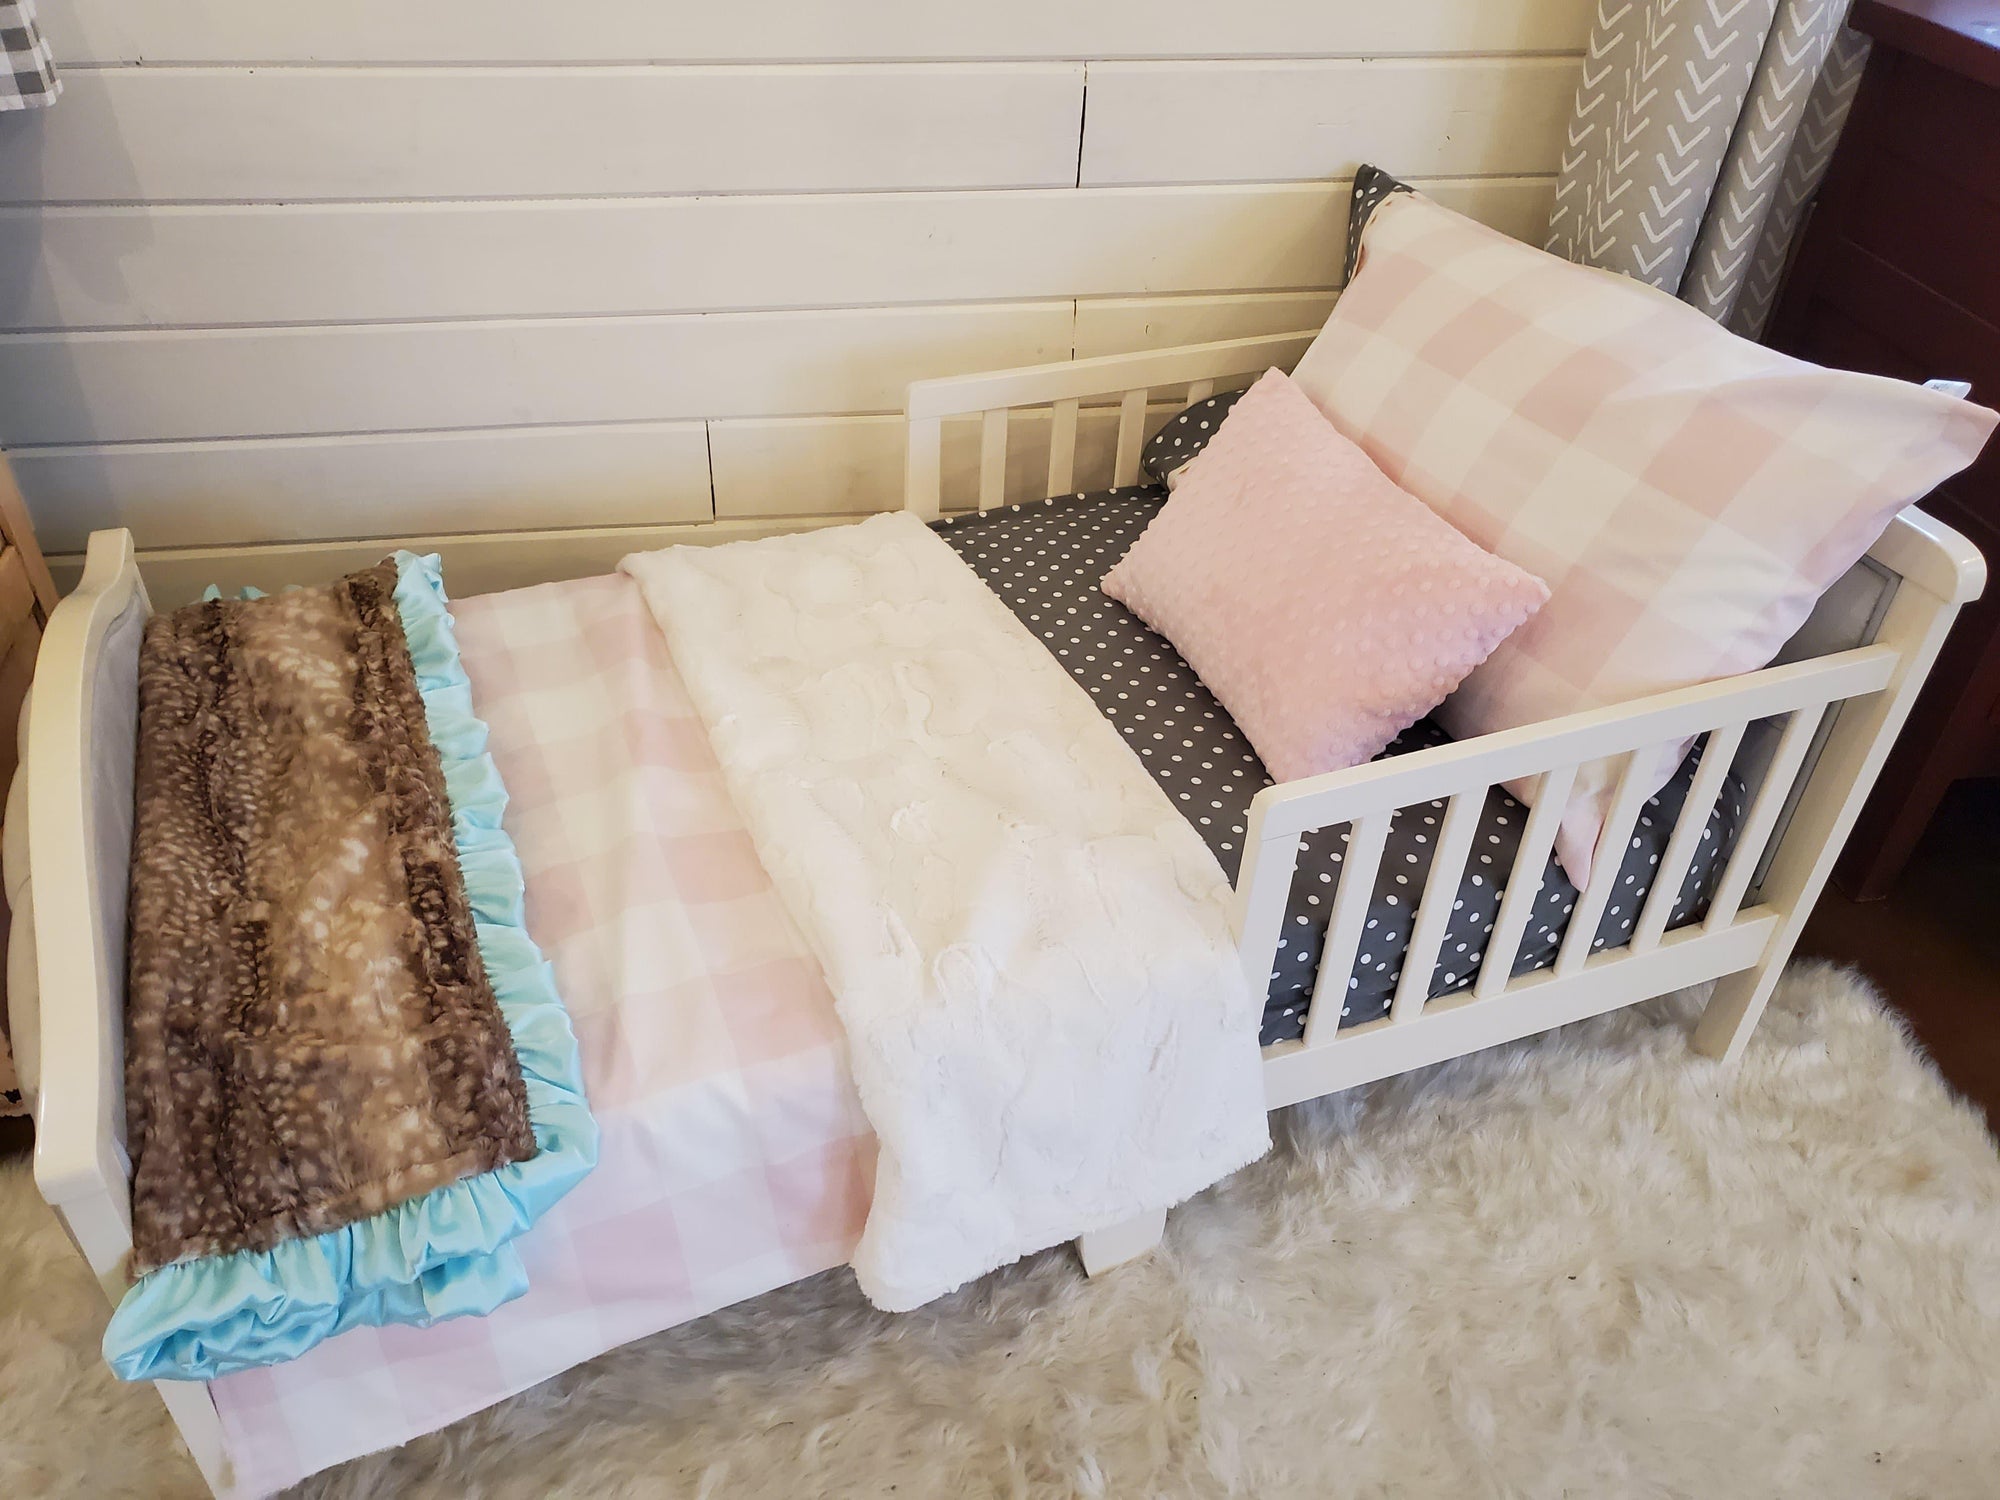 Toddler or Twin Bedding - Serape and Cheetah Minky Collection